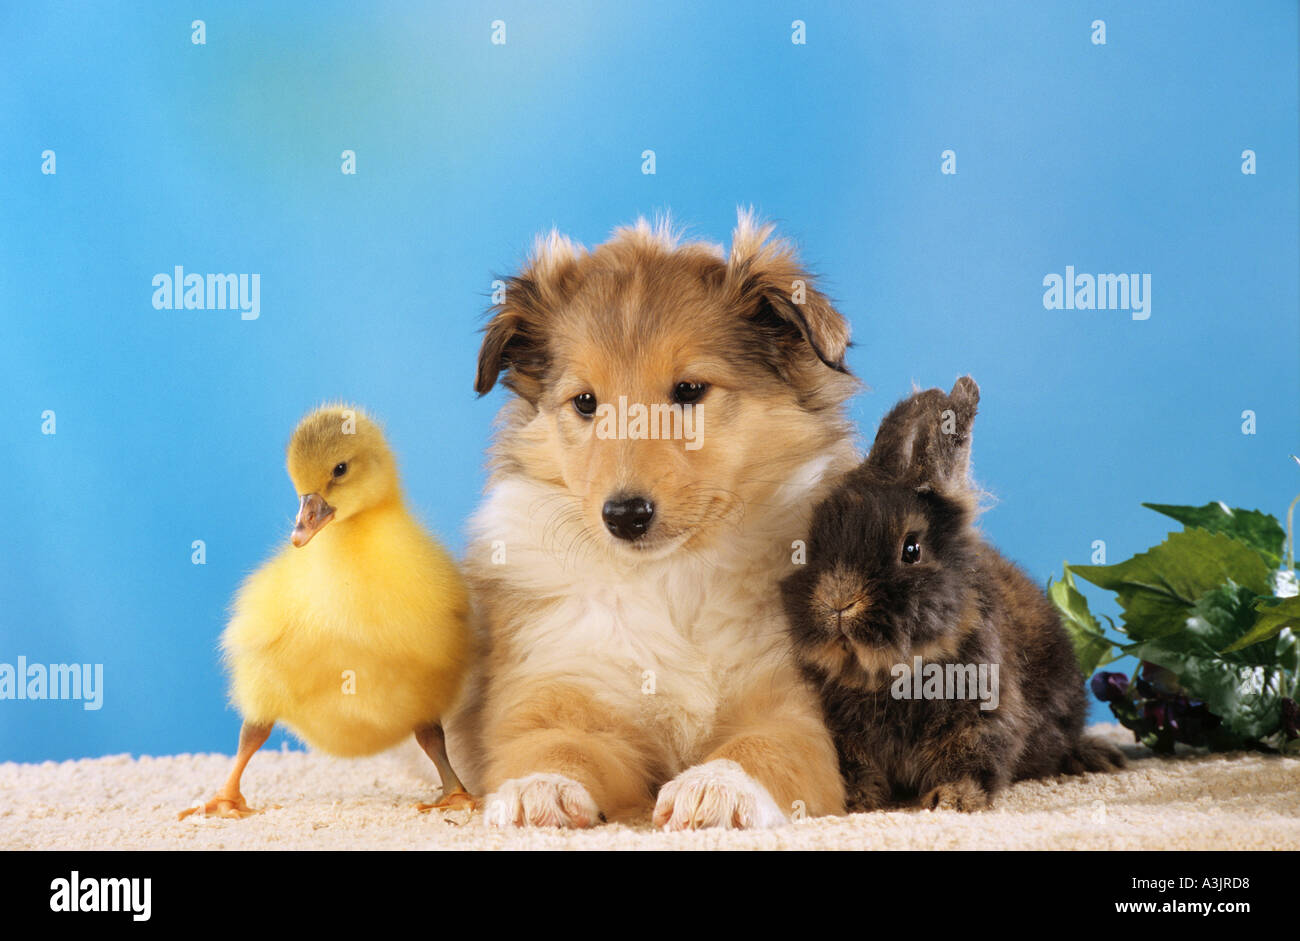 animal friendship : Collie dog puppy with duckling and rabbit Stock Photo